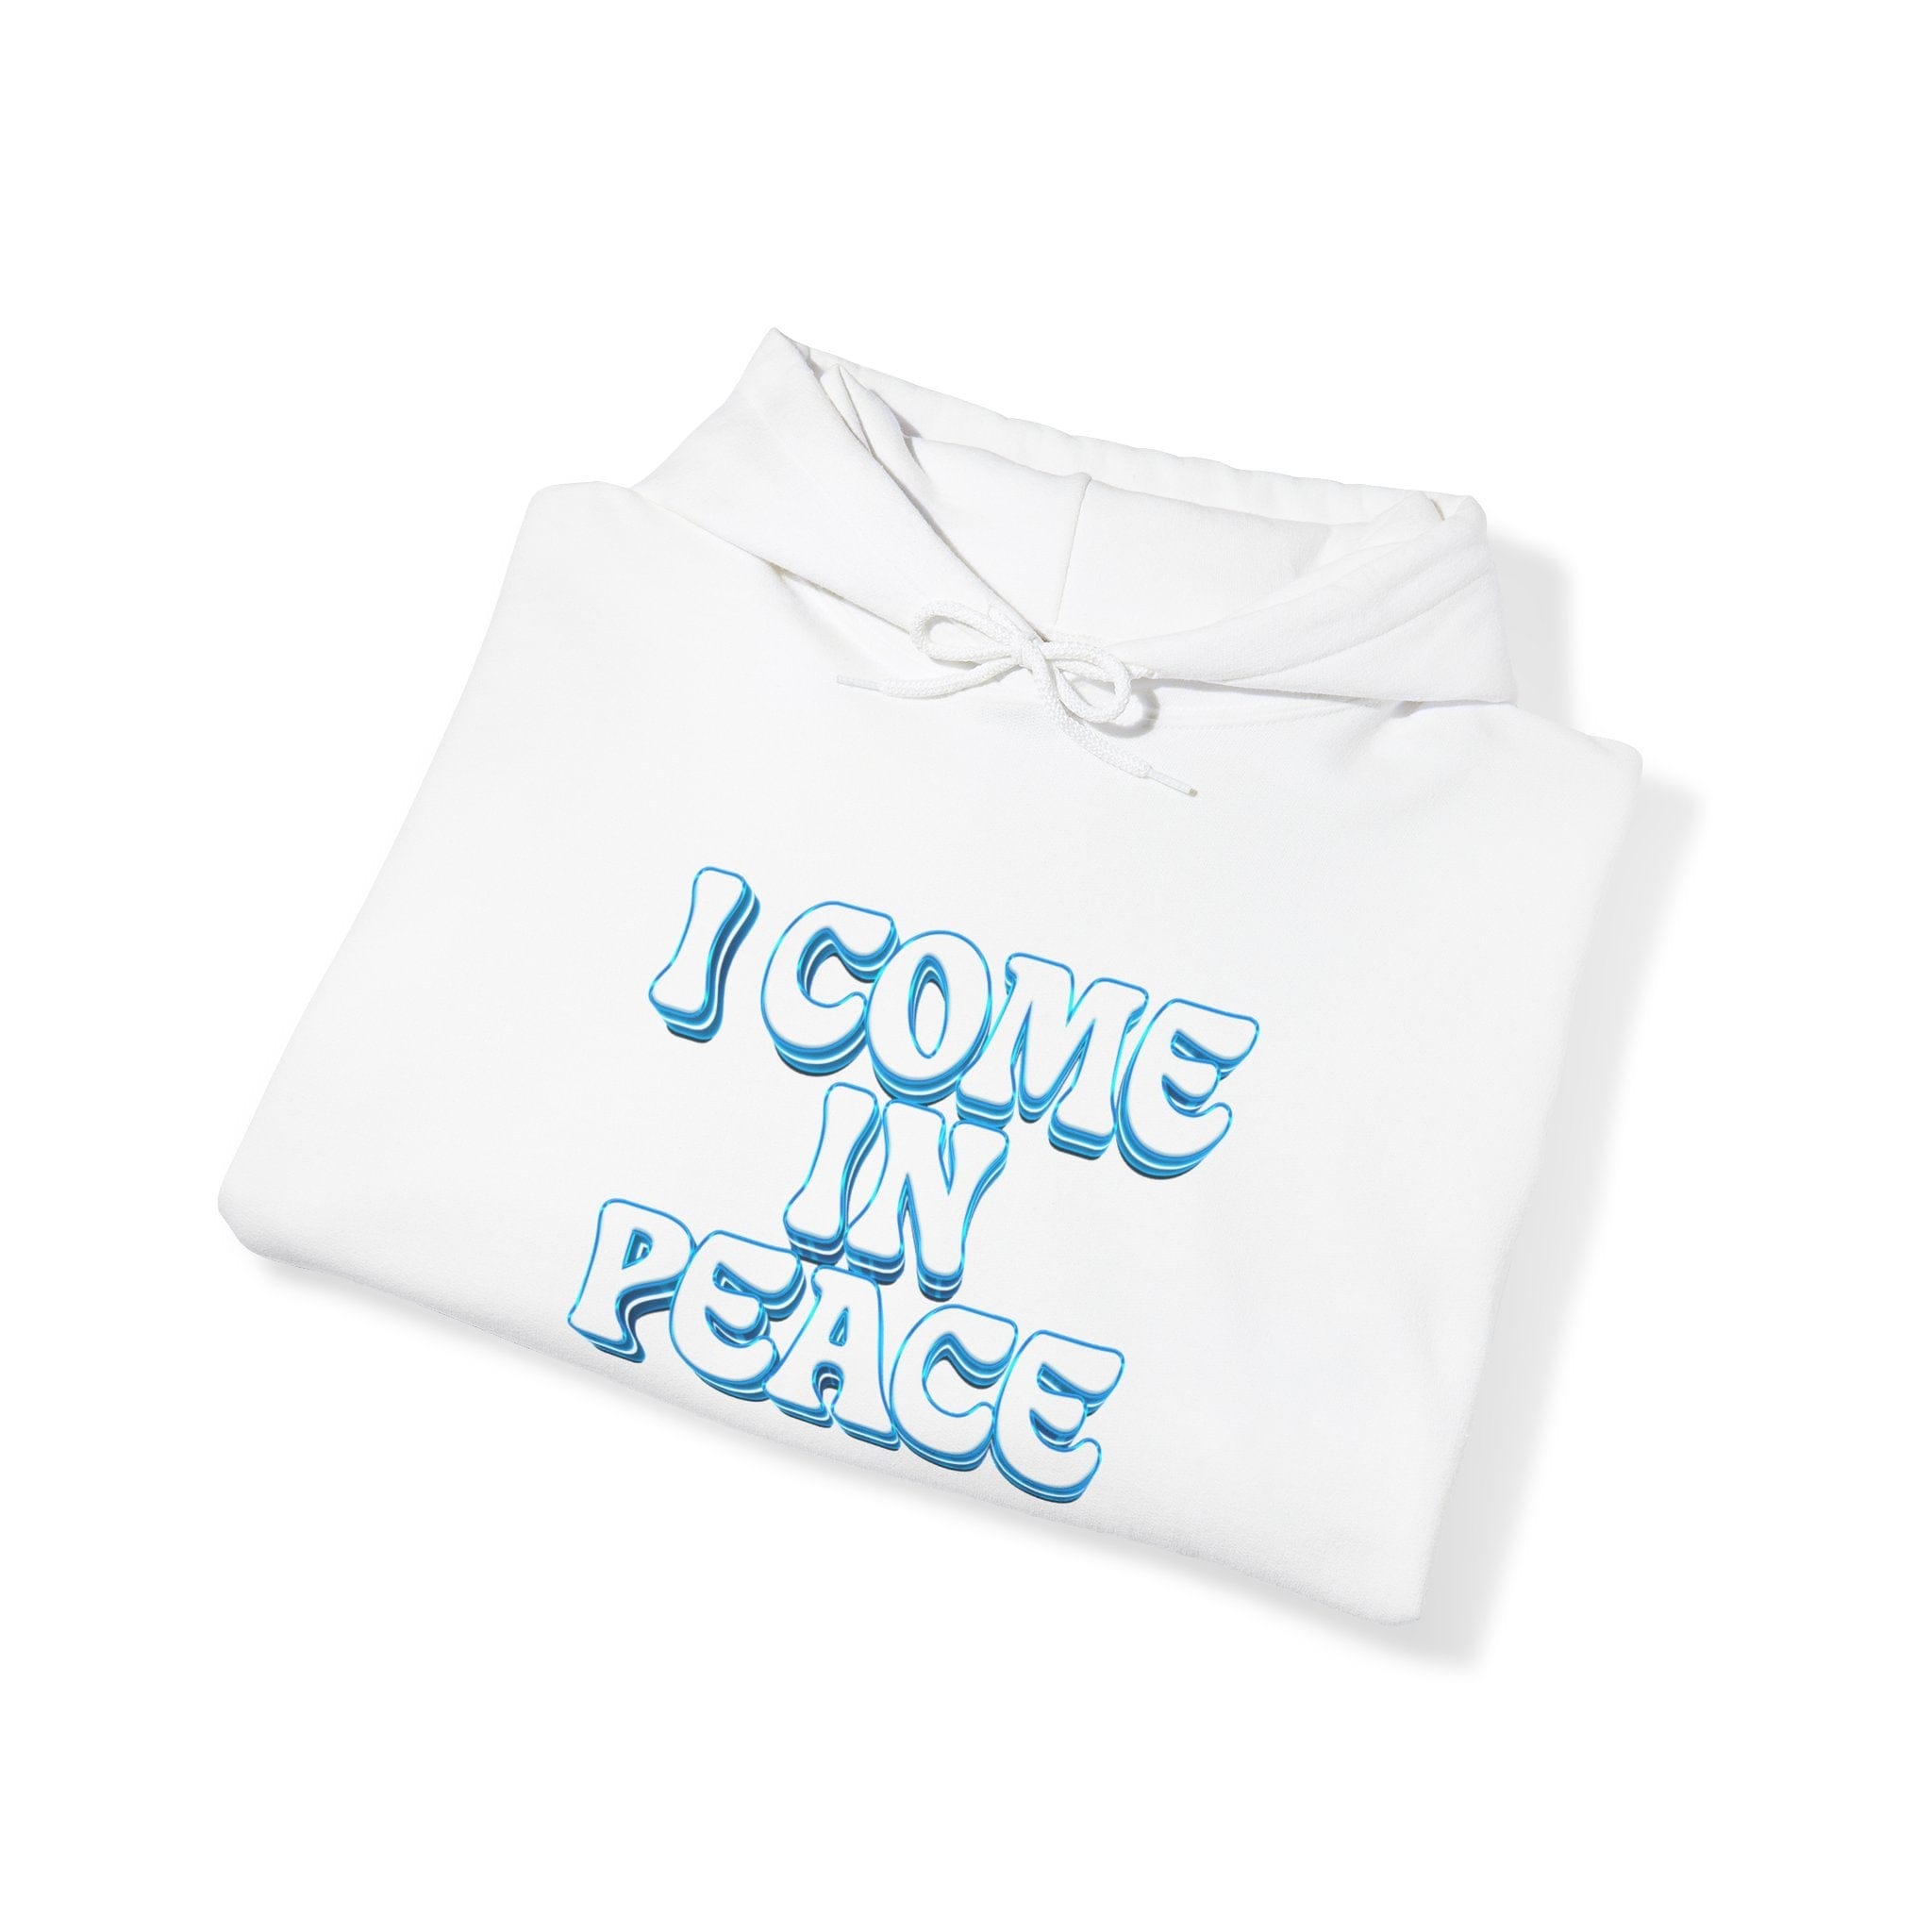 I Come In Peace | Unisex Essential hoodie | Navy